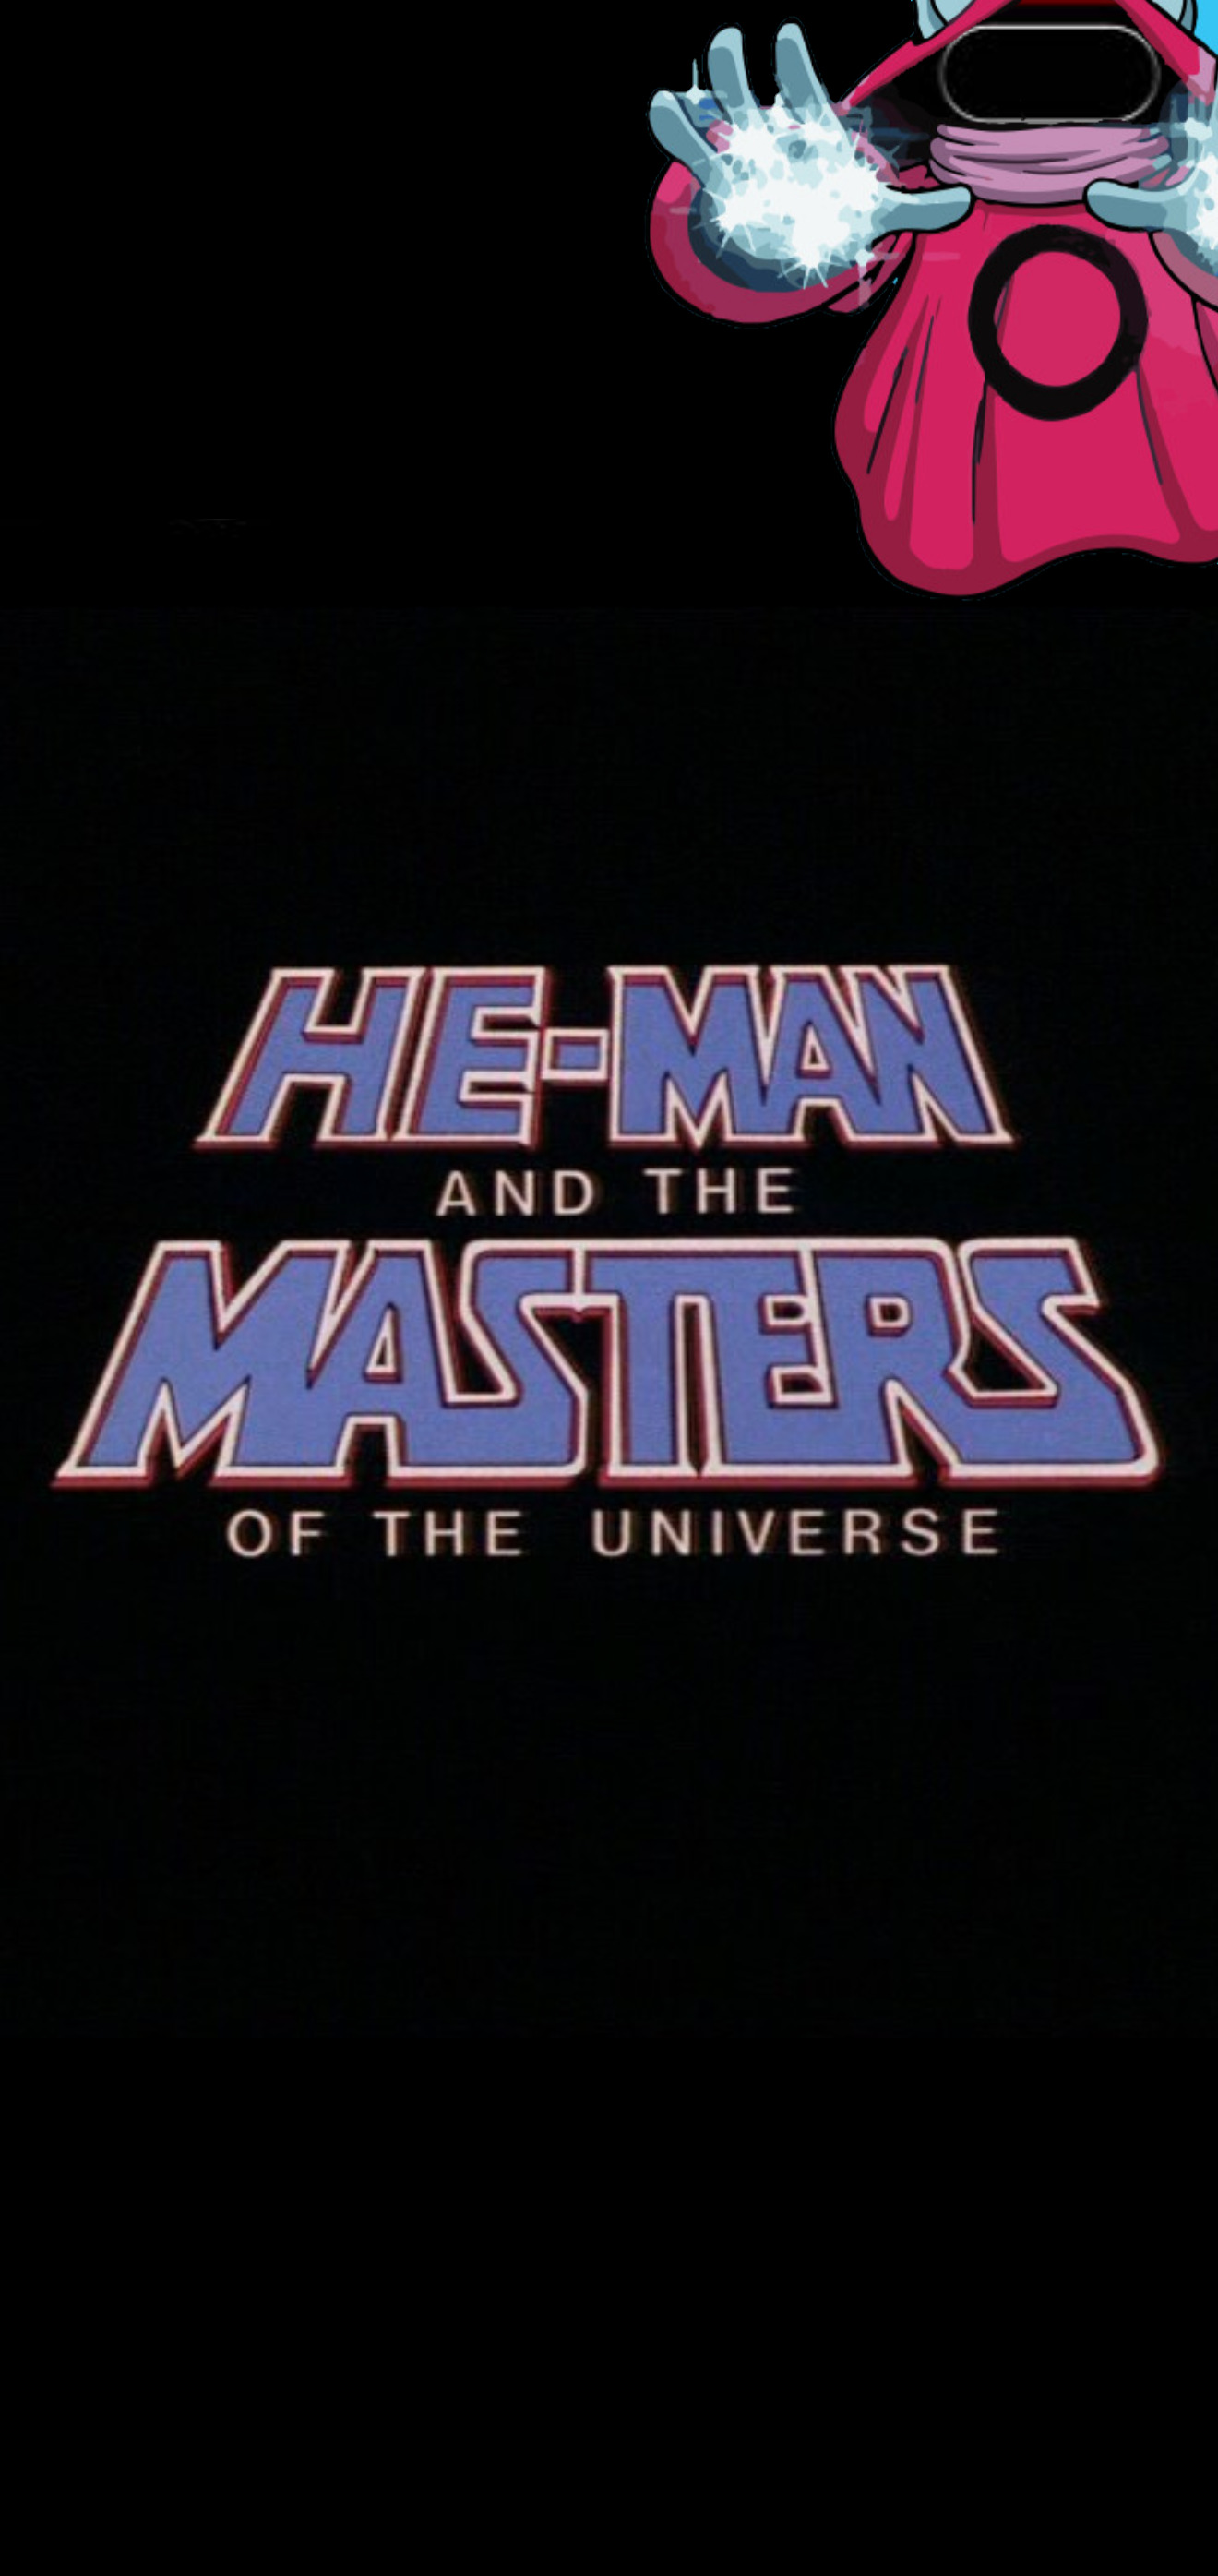 He Man The Master Of Universe - 1320x2791 Wallpaper 